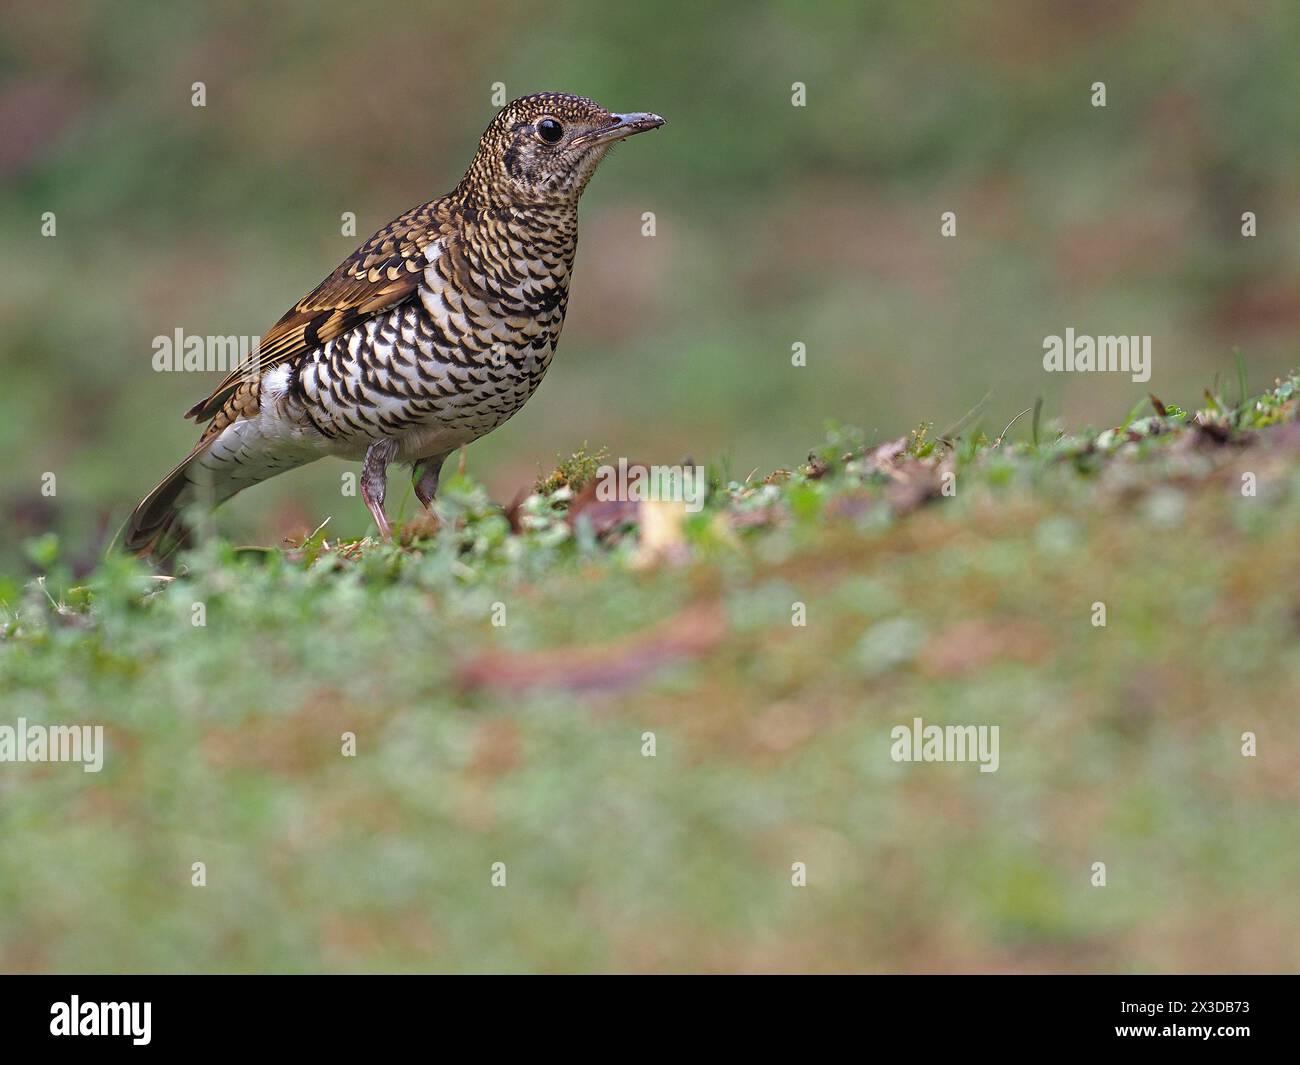 scaly thrush (Zoothera dauma), adult perched on the floor, Thailand Stock Photo